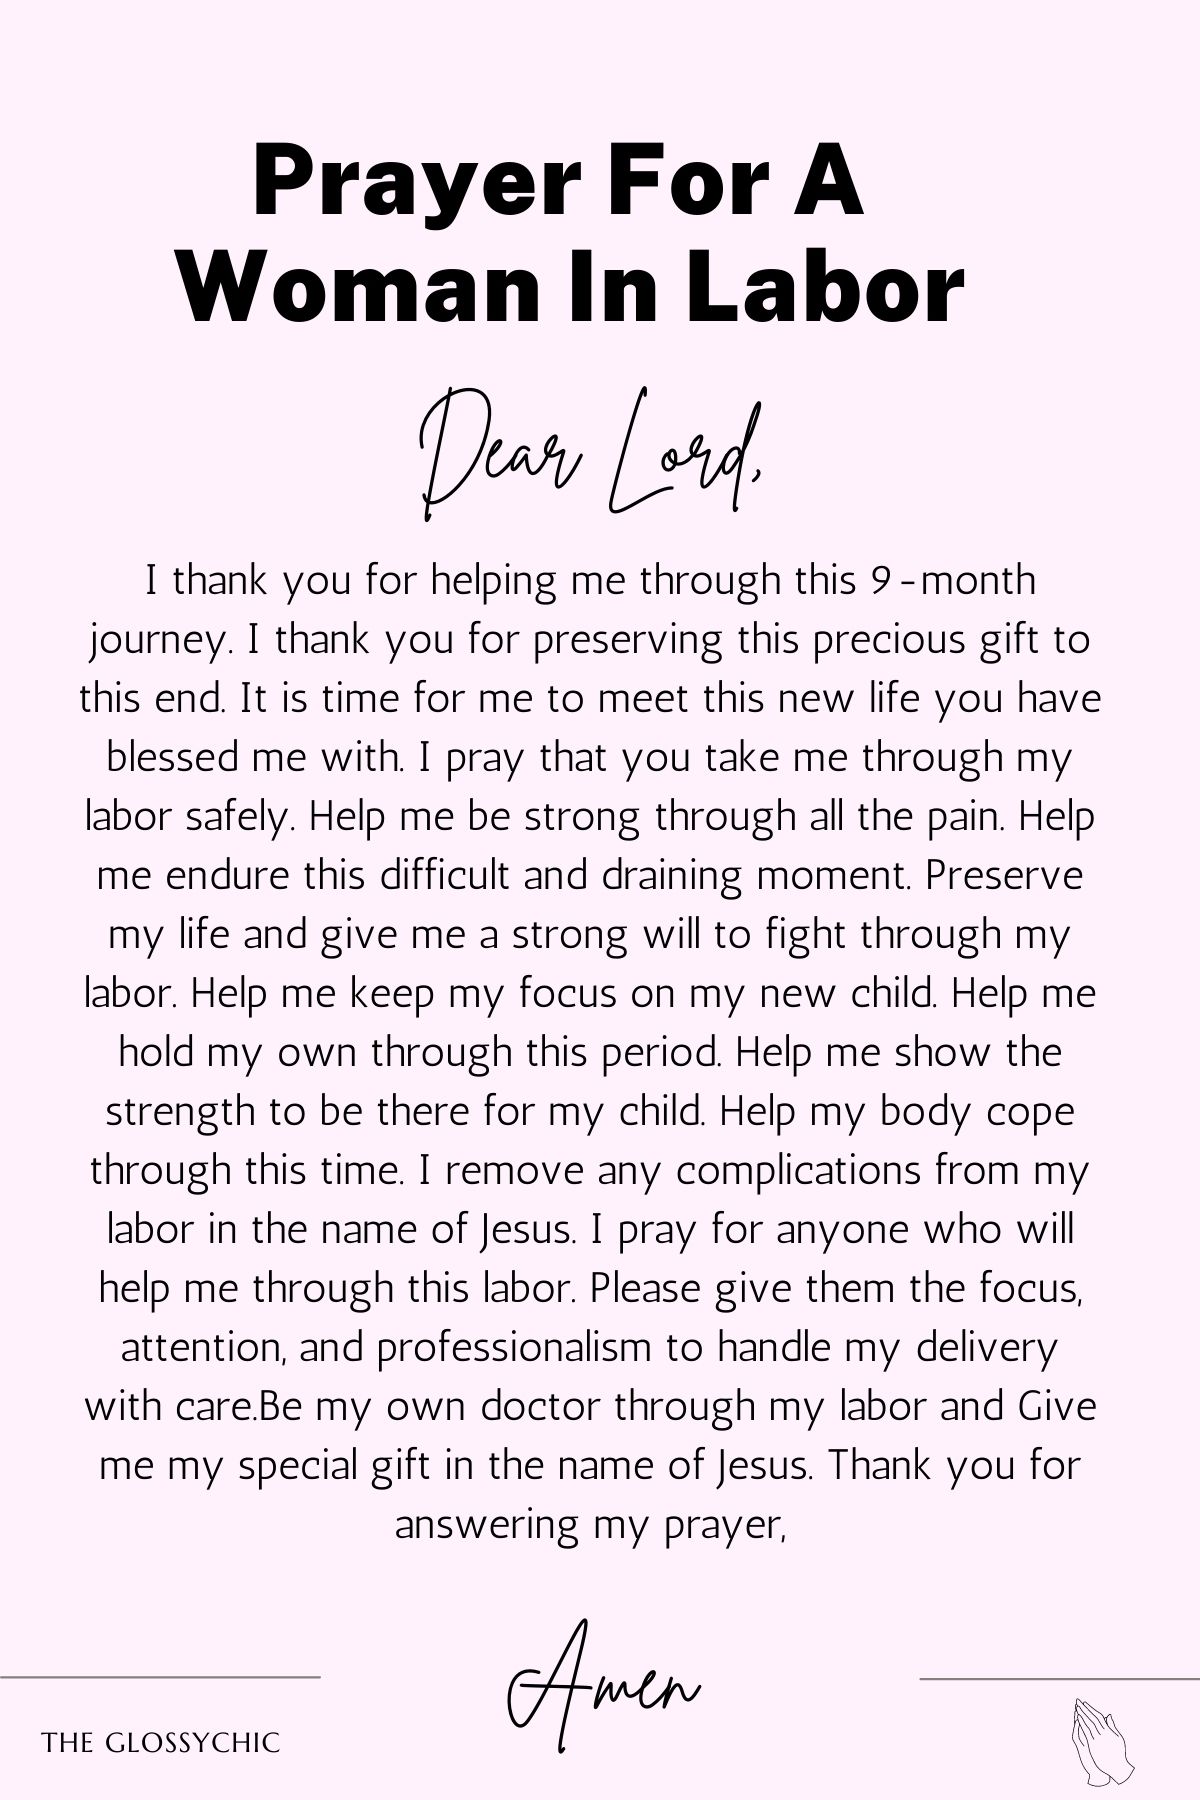 Prayer for a woman in labor